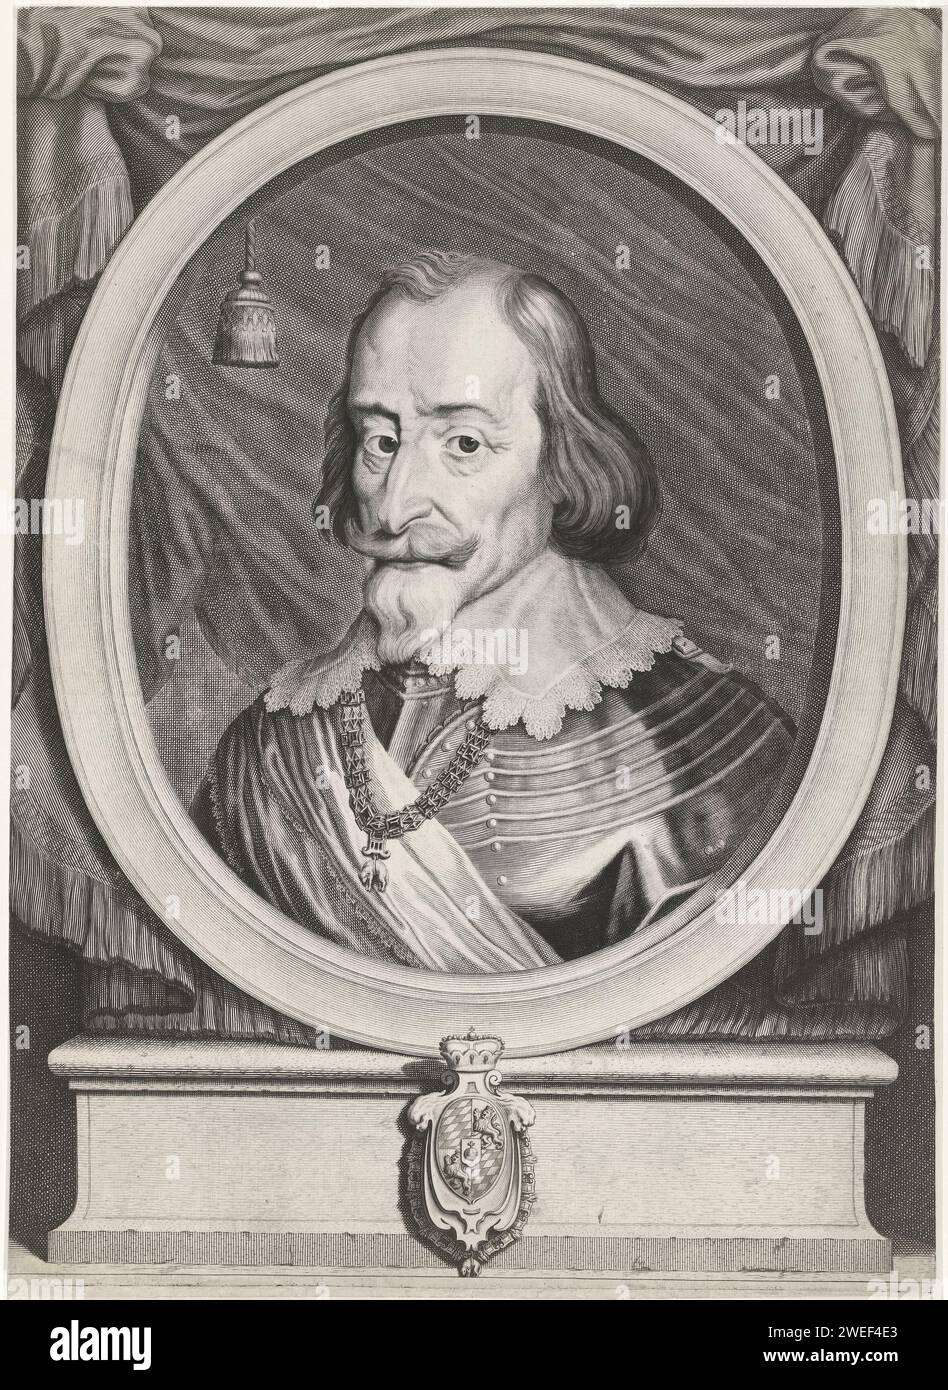 Portrait of Maximilian I van Bavaria, Michel Natalis, After Joachim von Sandrart (I), 1643 print Portrait of Maximilian I van Bavaria, dressed in armor and with sash. The chain of the order of the Golden Fleece hangs on his chest. Bust to the left in Ovaal. In the middle, under the portrait, his weapon. Shutter paper engraving knighthood order of the Golden Fleece - insignia of a knighthood order, e.g.: badge, chain (with NAME of order). armorial bearing, heraldry Stock Photo